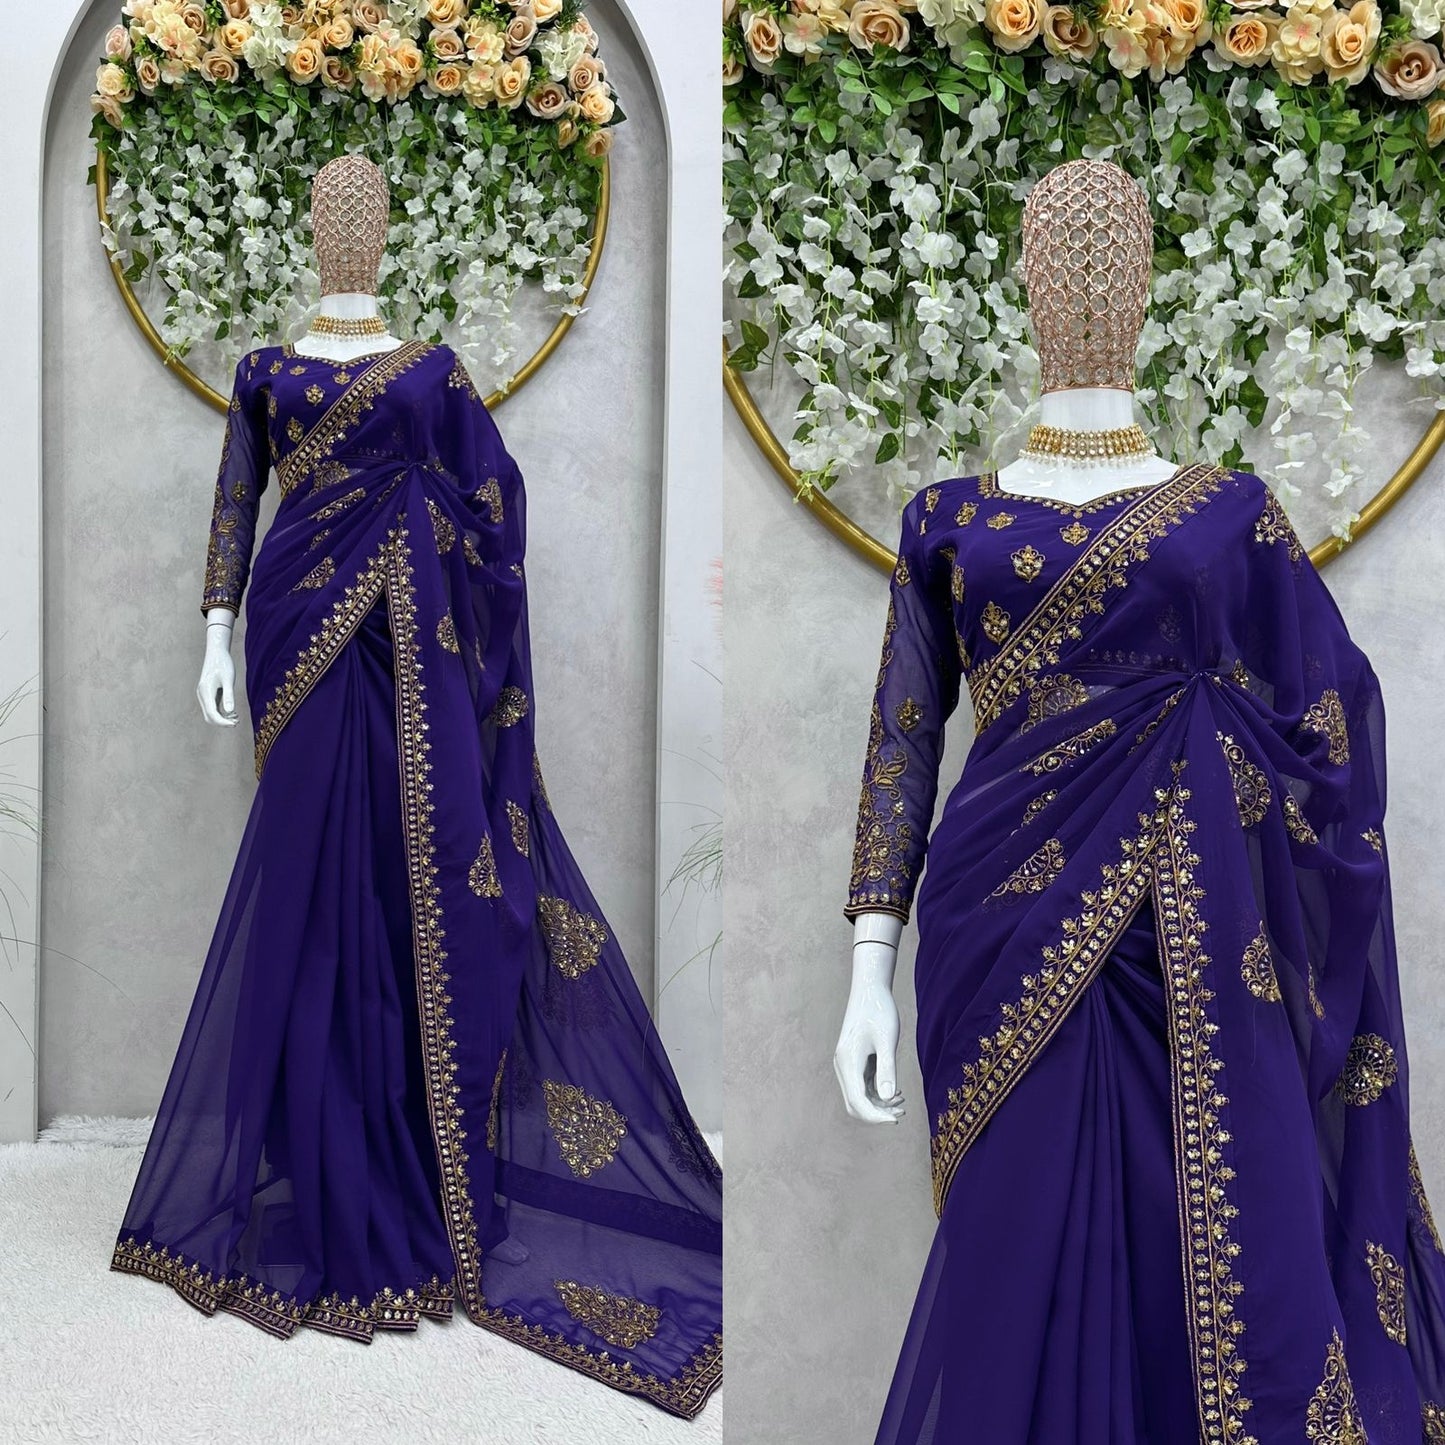 Elevate Your Style with Our Stunning Saree Collection